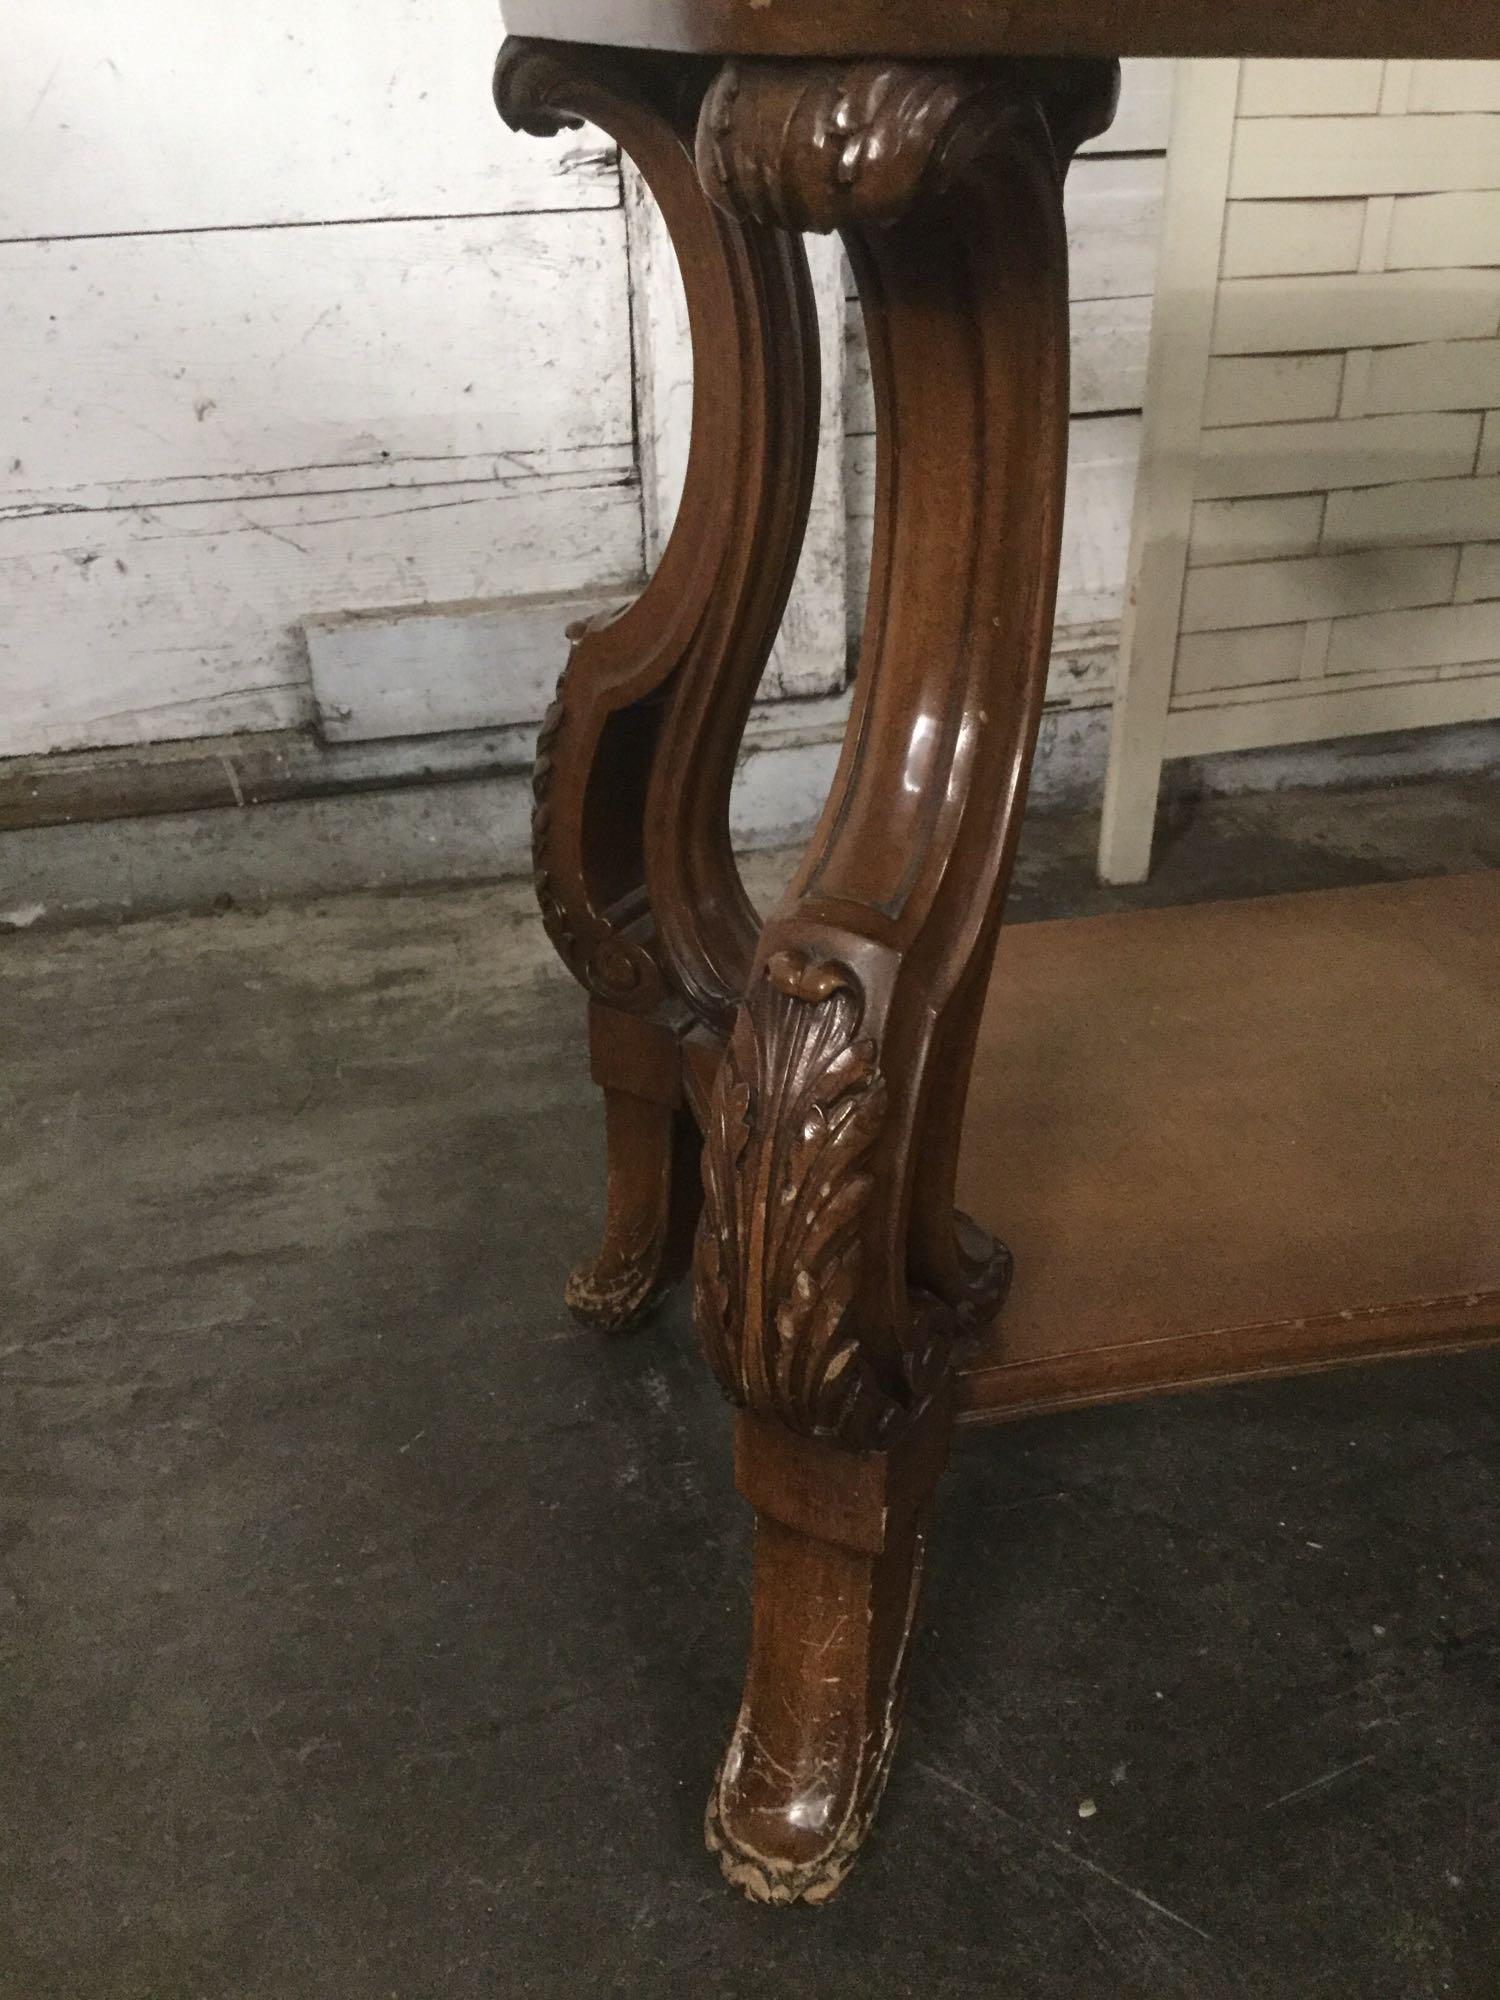 Vintage walnut antique style corner end table or coffee table